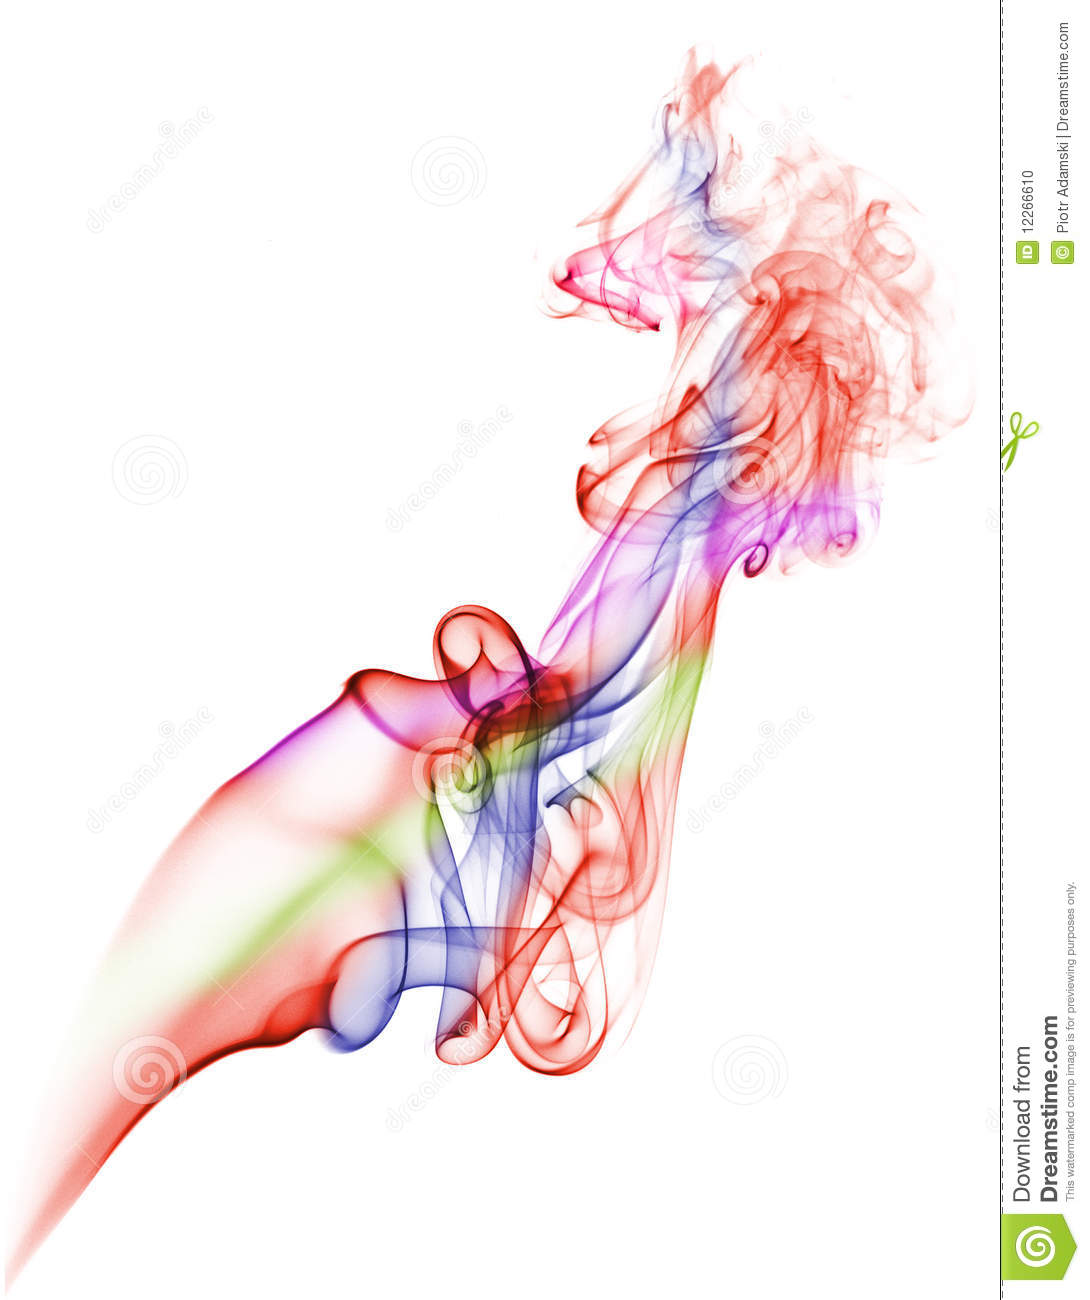 Colourful Art Created From Candle Smoke Against A White Background